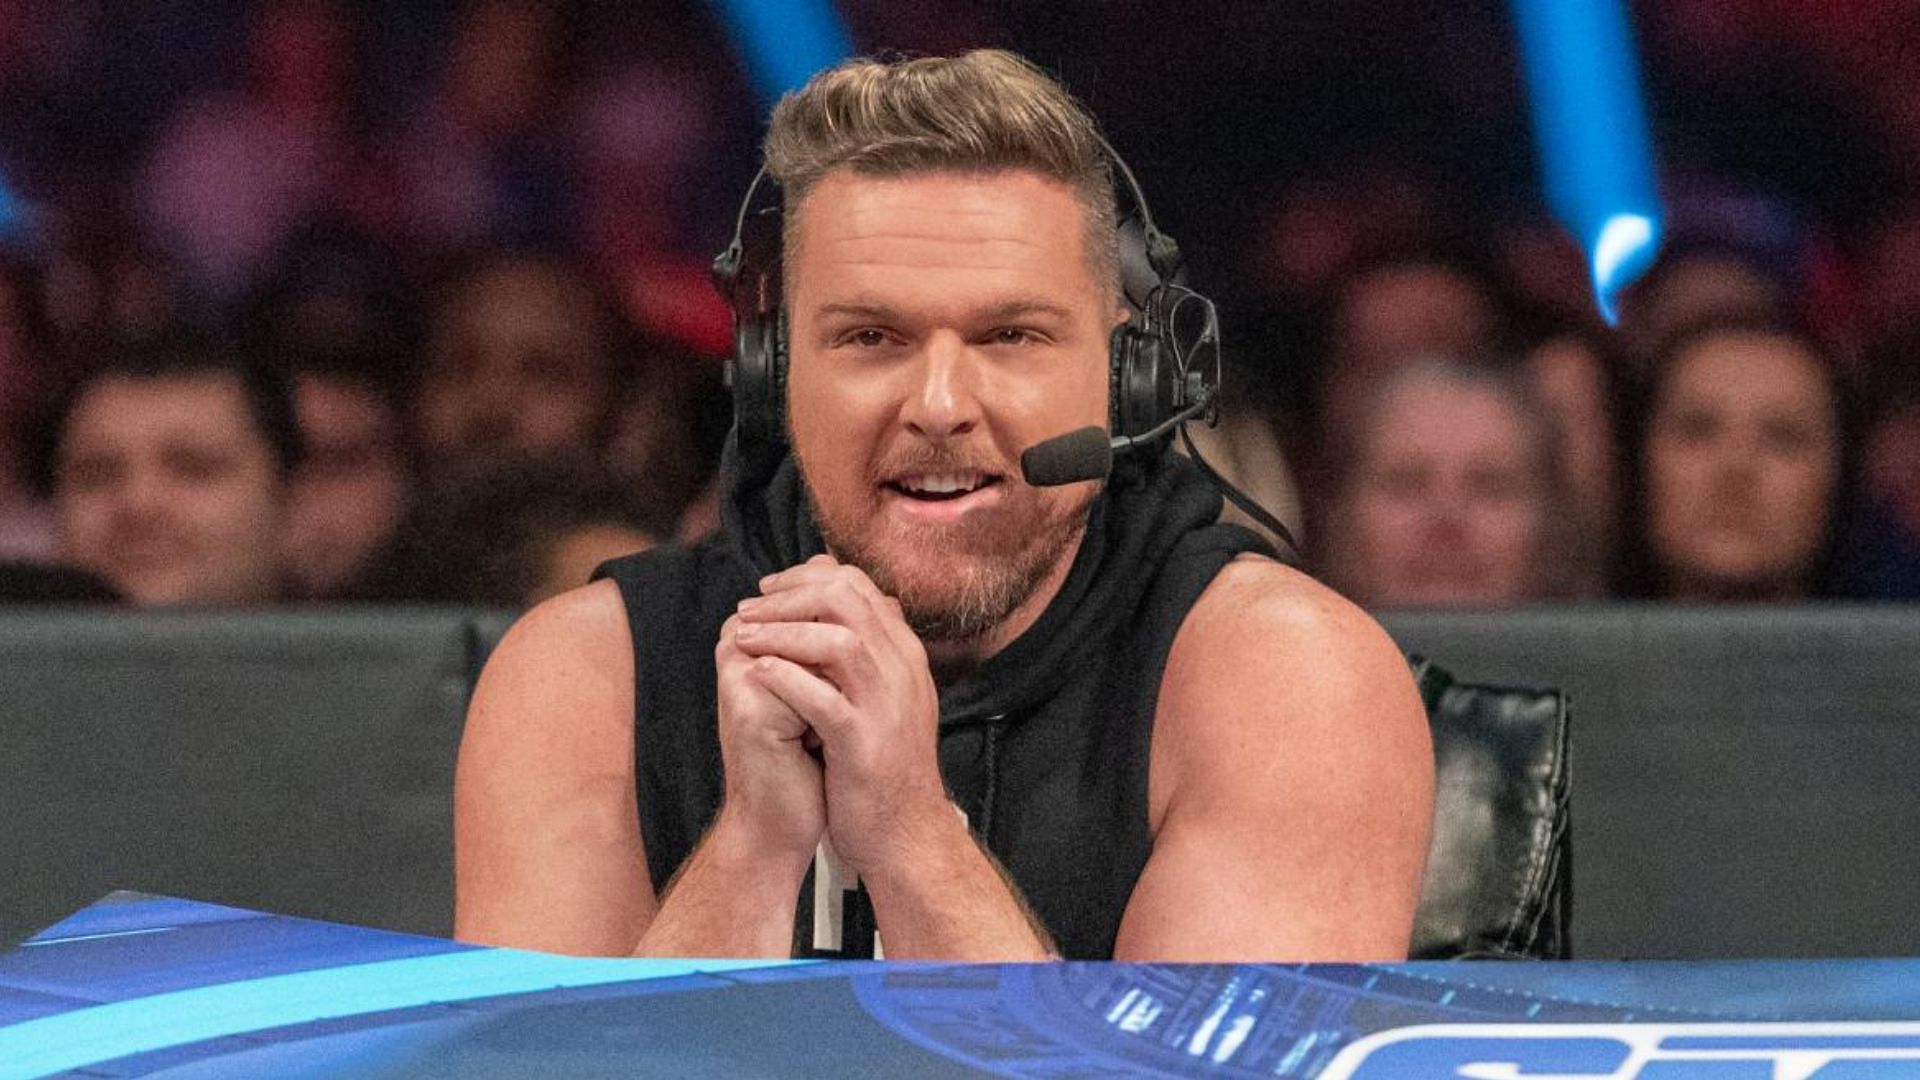 WWE SmackDown announcer Pat McAfee has a new gig